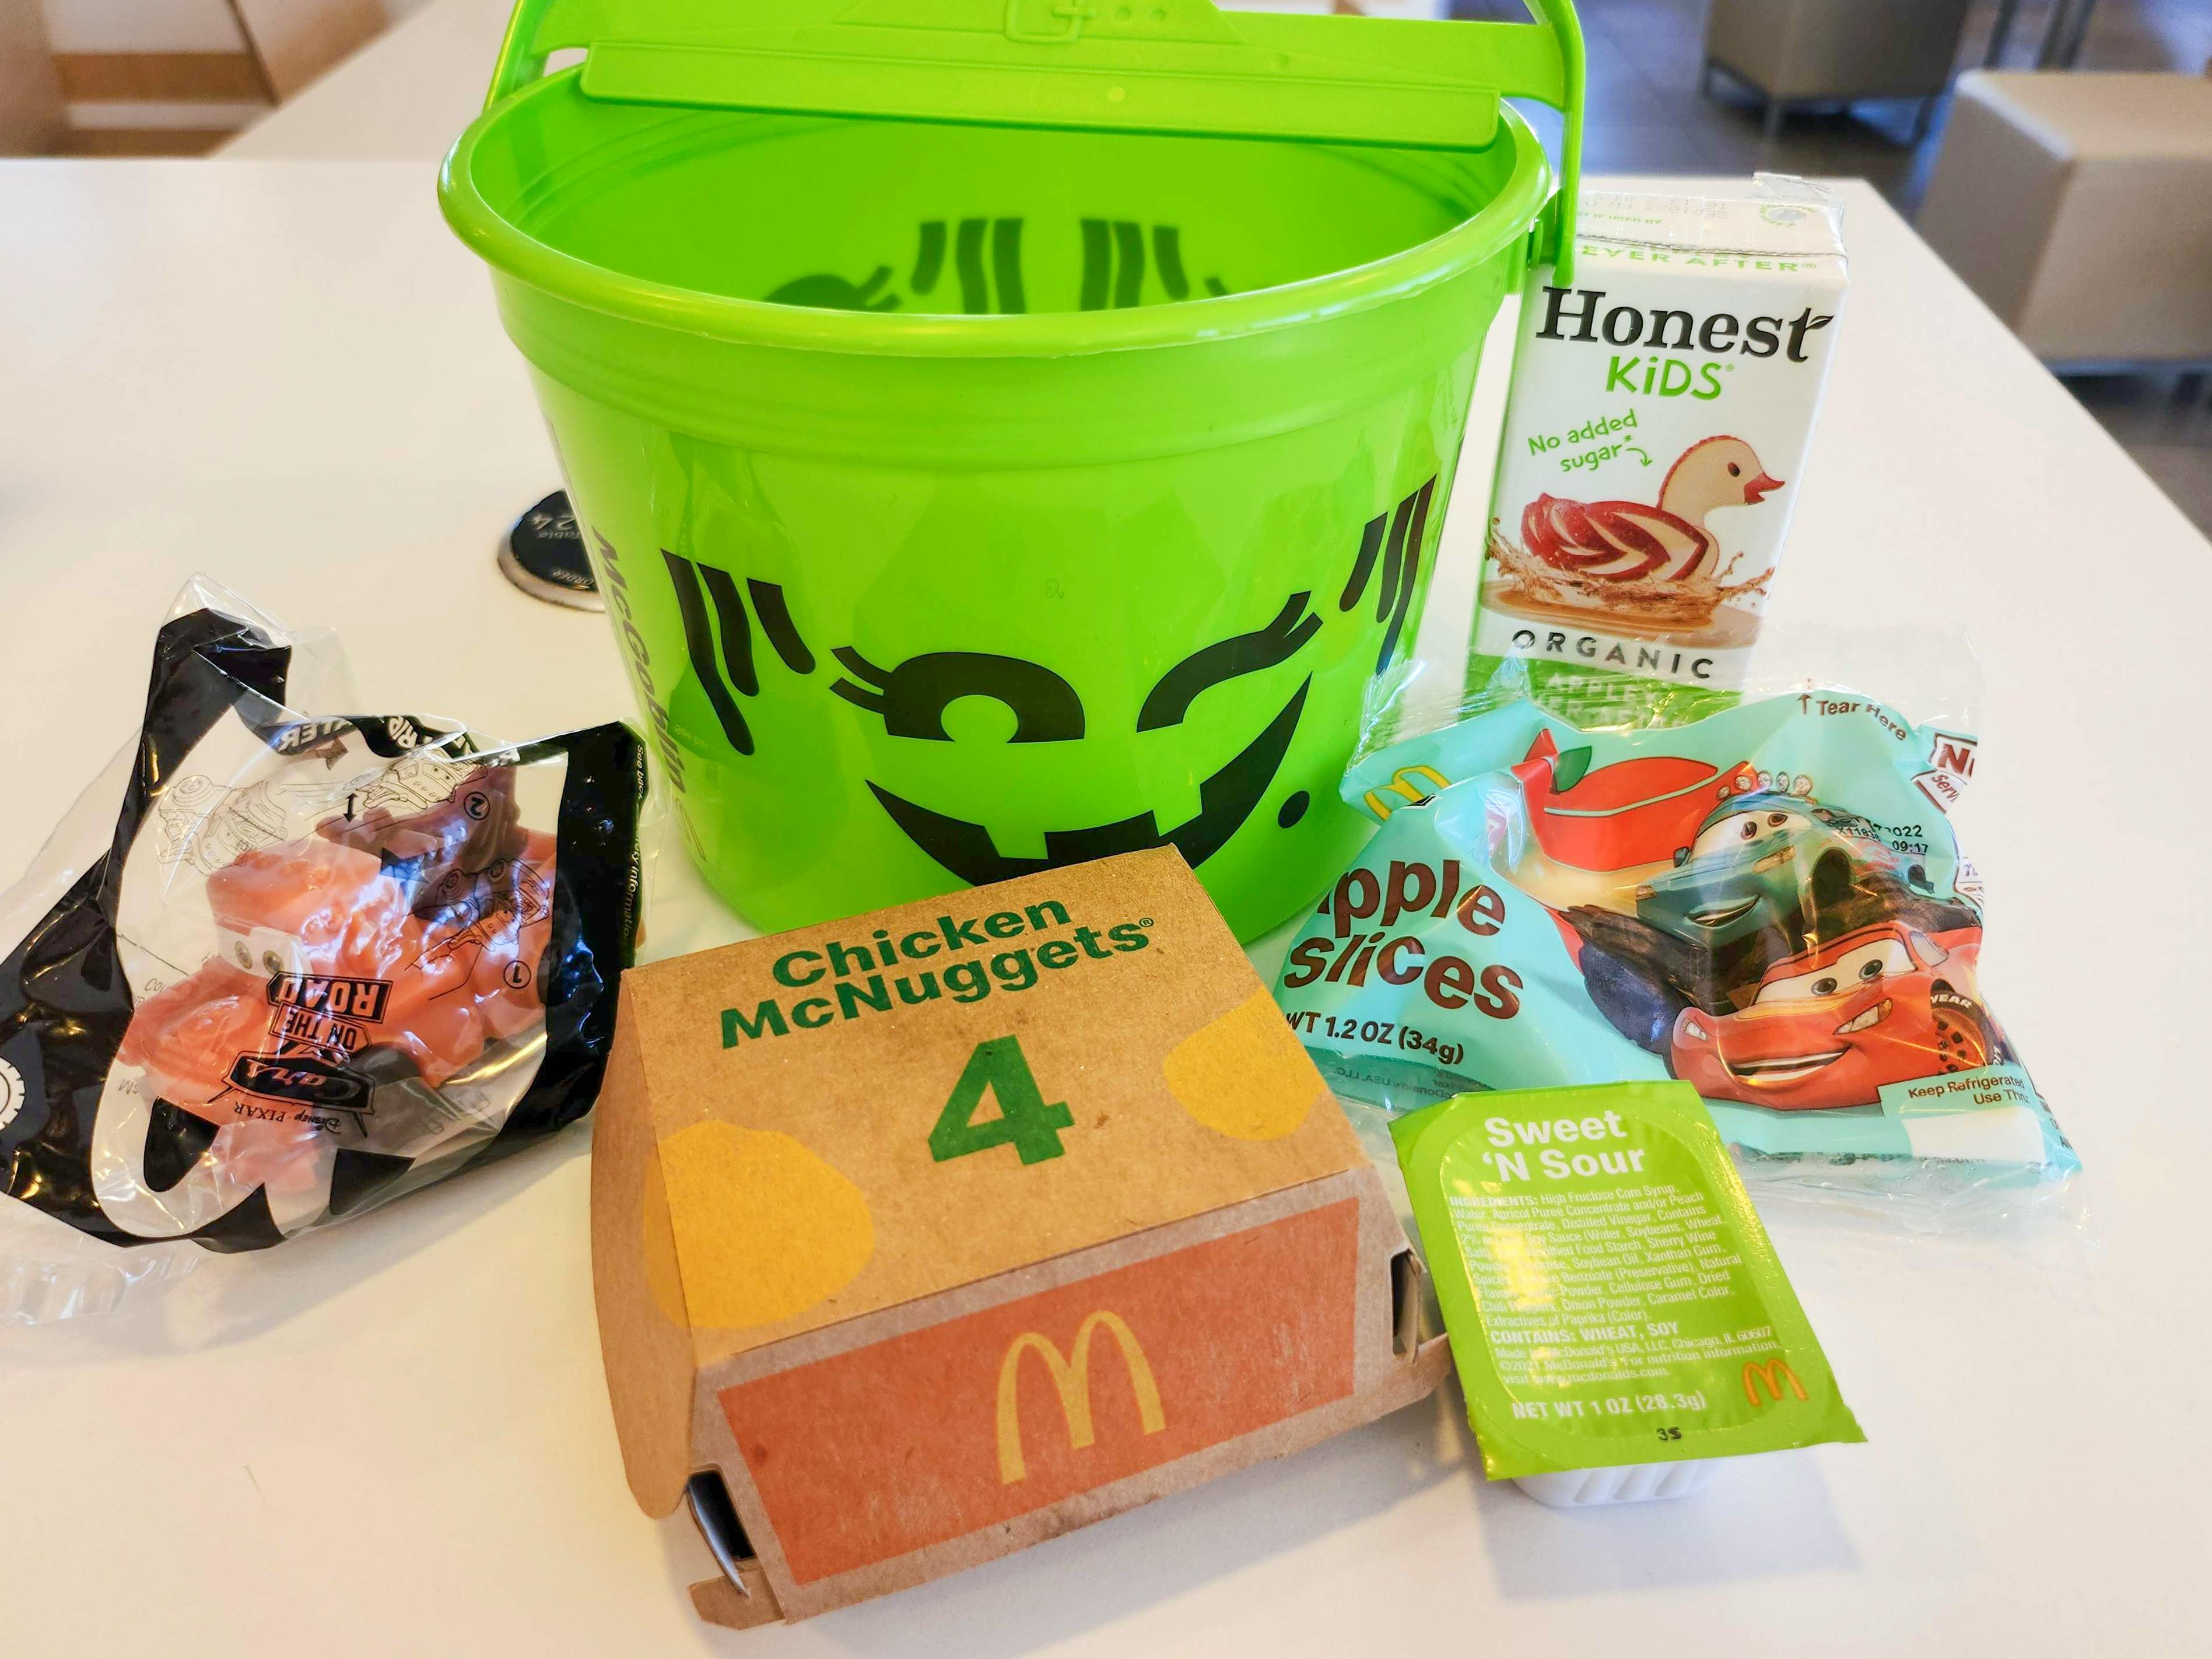 A green McDonalds happy meal Halloween pail with food